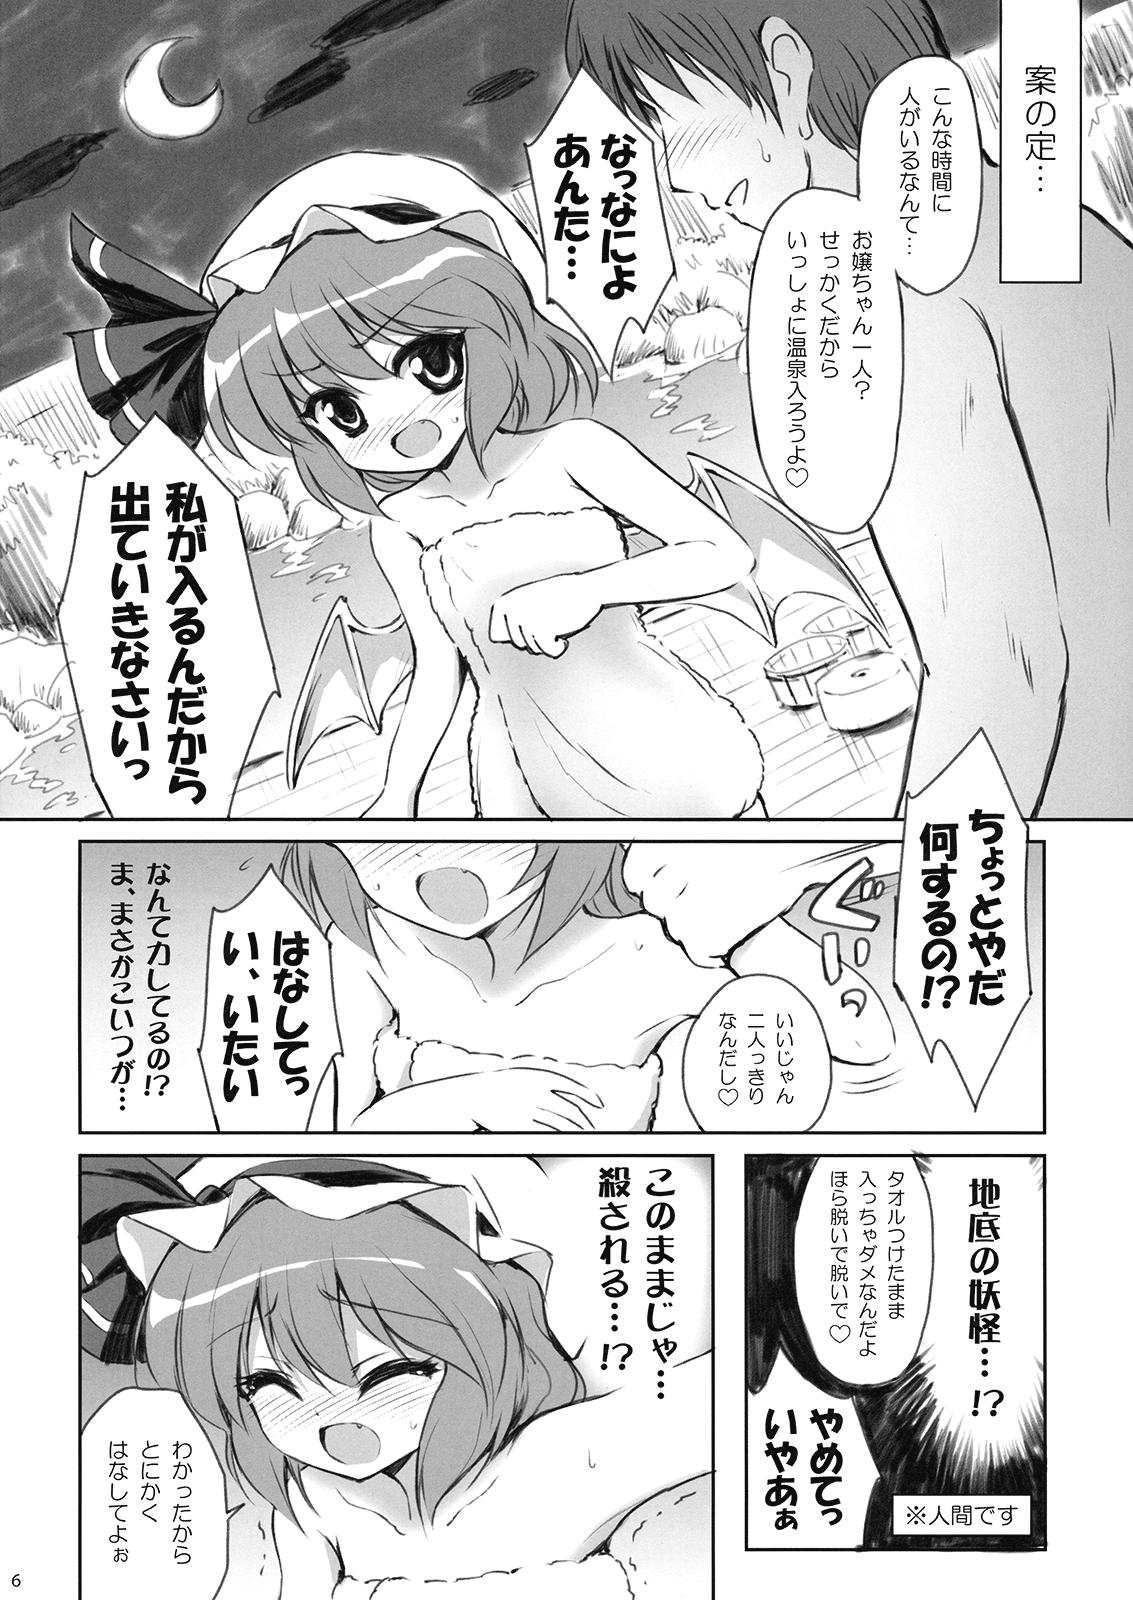 Rough Porn CHILD DRAGON - Touhou project Teens - Page 6